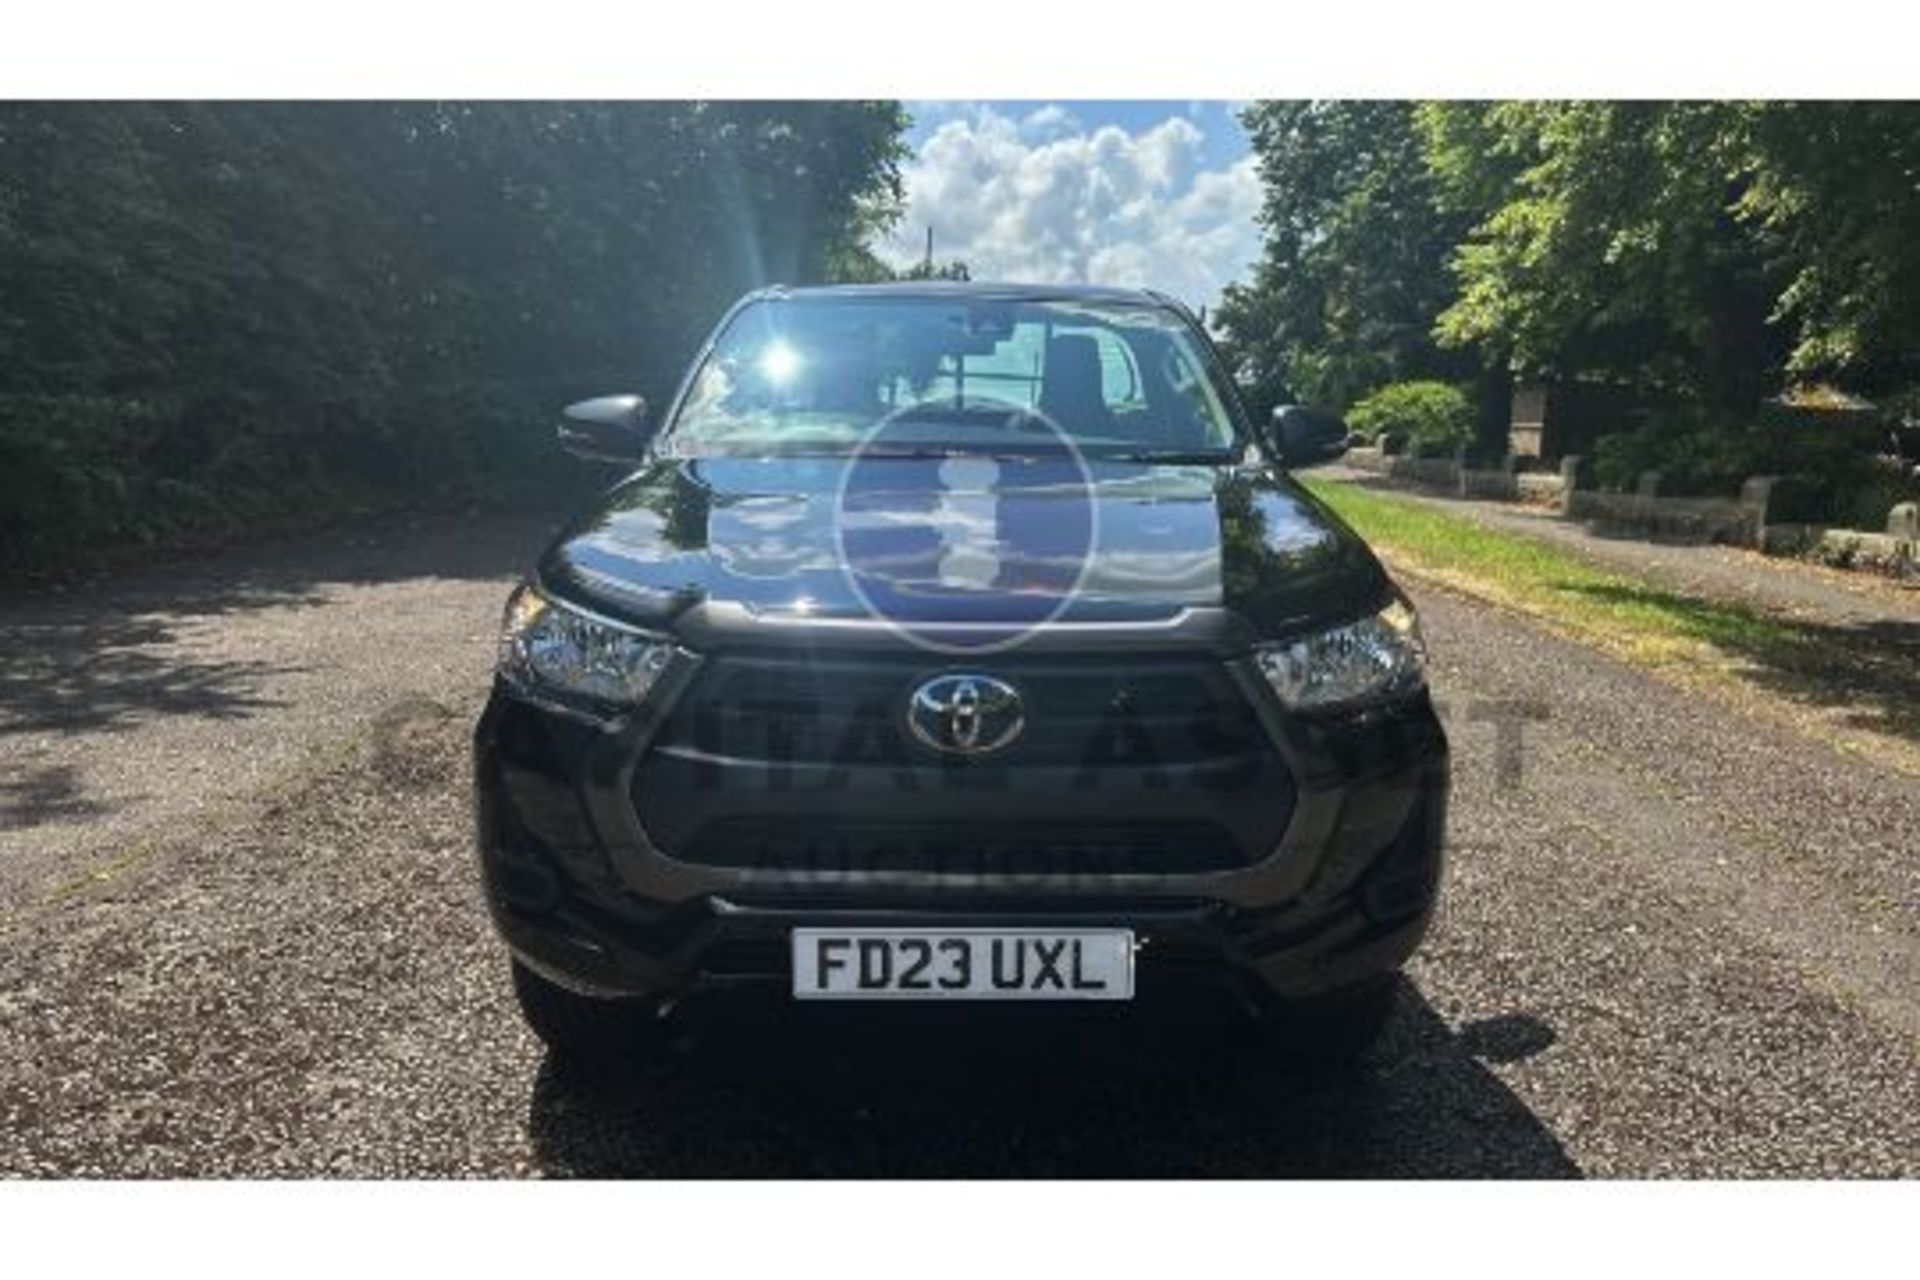 TOYOTA HILUX 2.4D-4D SINGLE CAB 4X4 PICK UP TRUCK - BLACK MODEL - 23 REG WITH DELIVERY MILES - WOW!! - Image 4 of 38